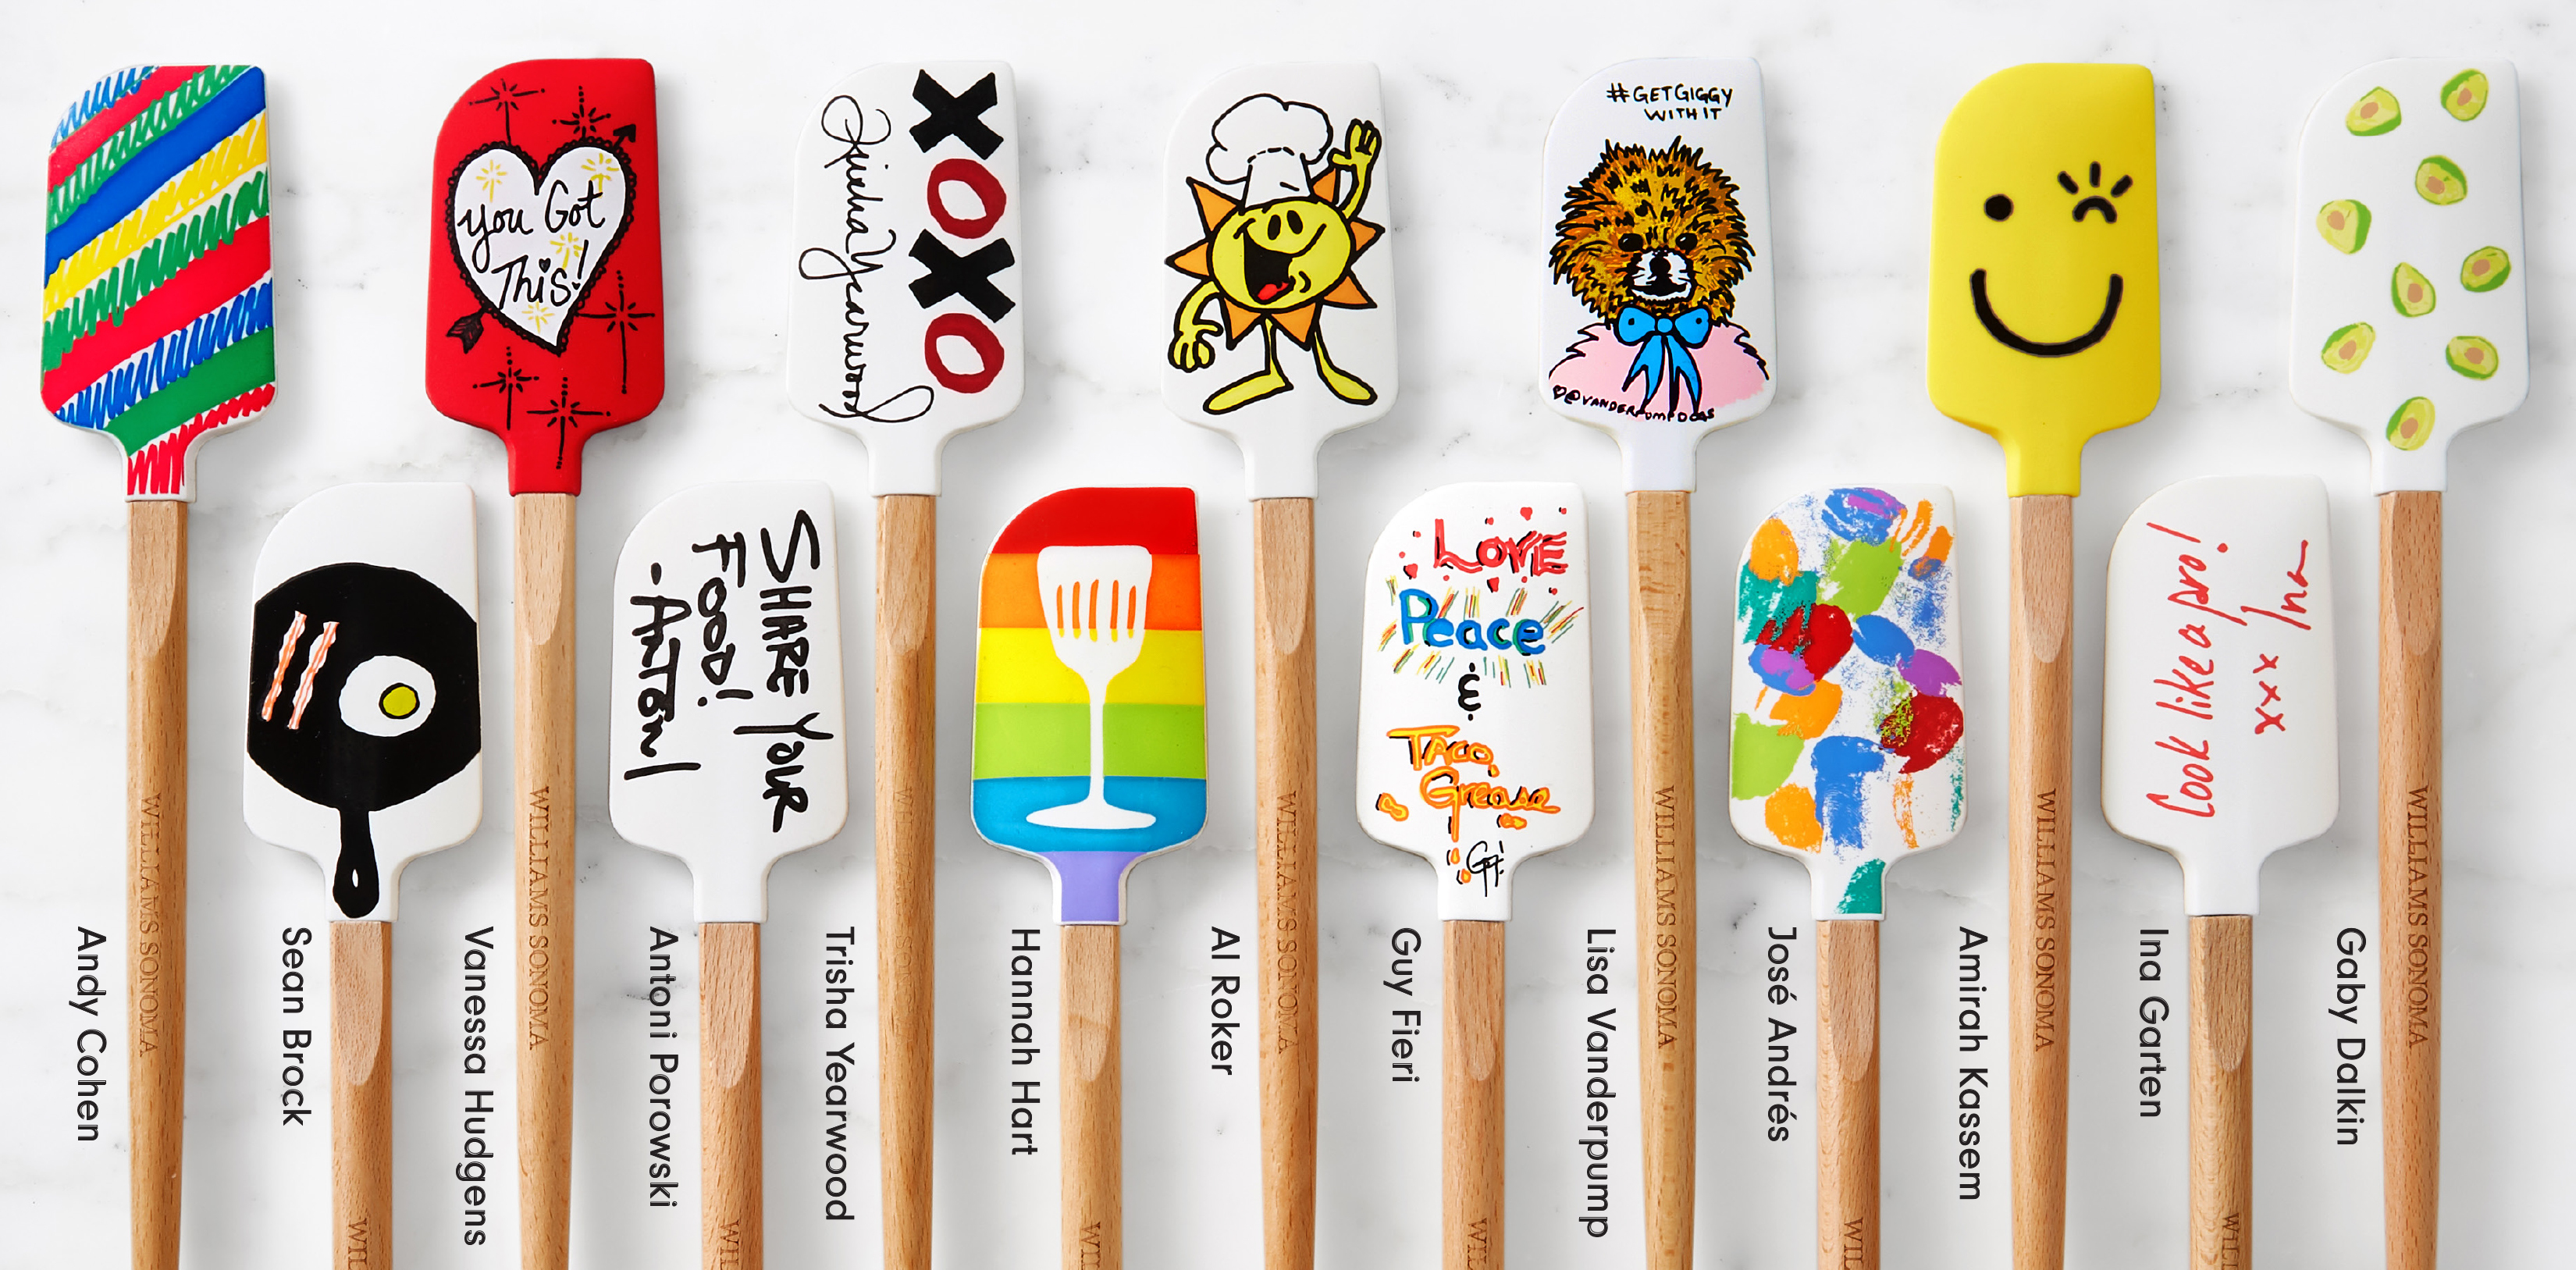 WILLIAMS SONOMA AND NO KID HUNGRY PARTNER WITH CELEBRITIES TO UNVEIL 5TH  ANNUAL TOOLS FOR CHANGE CAMPAIGN